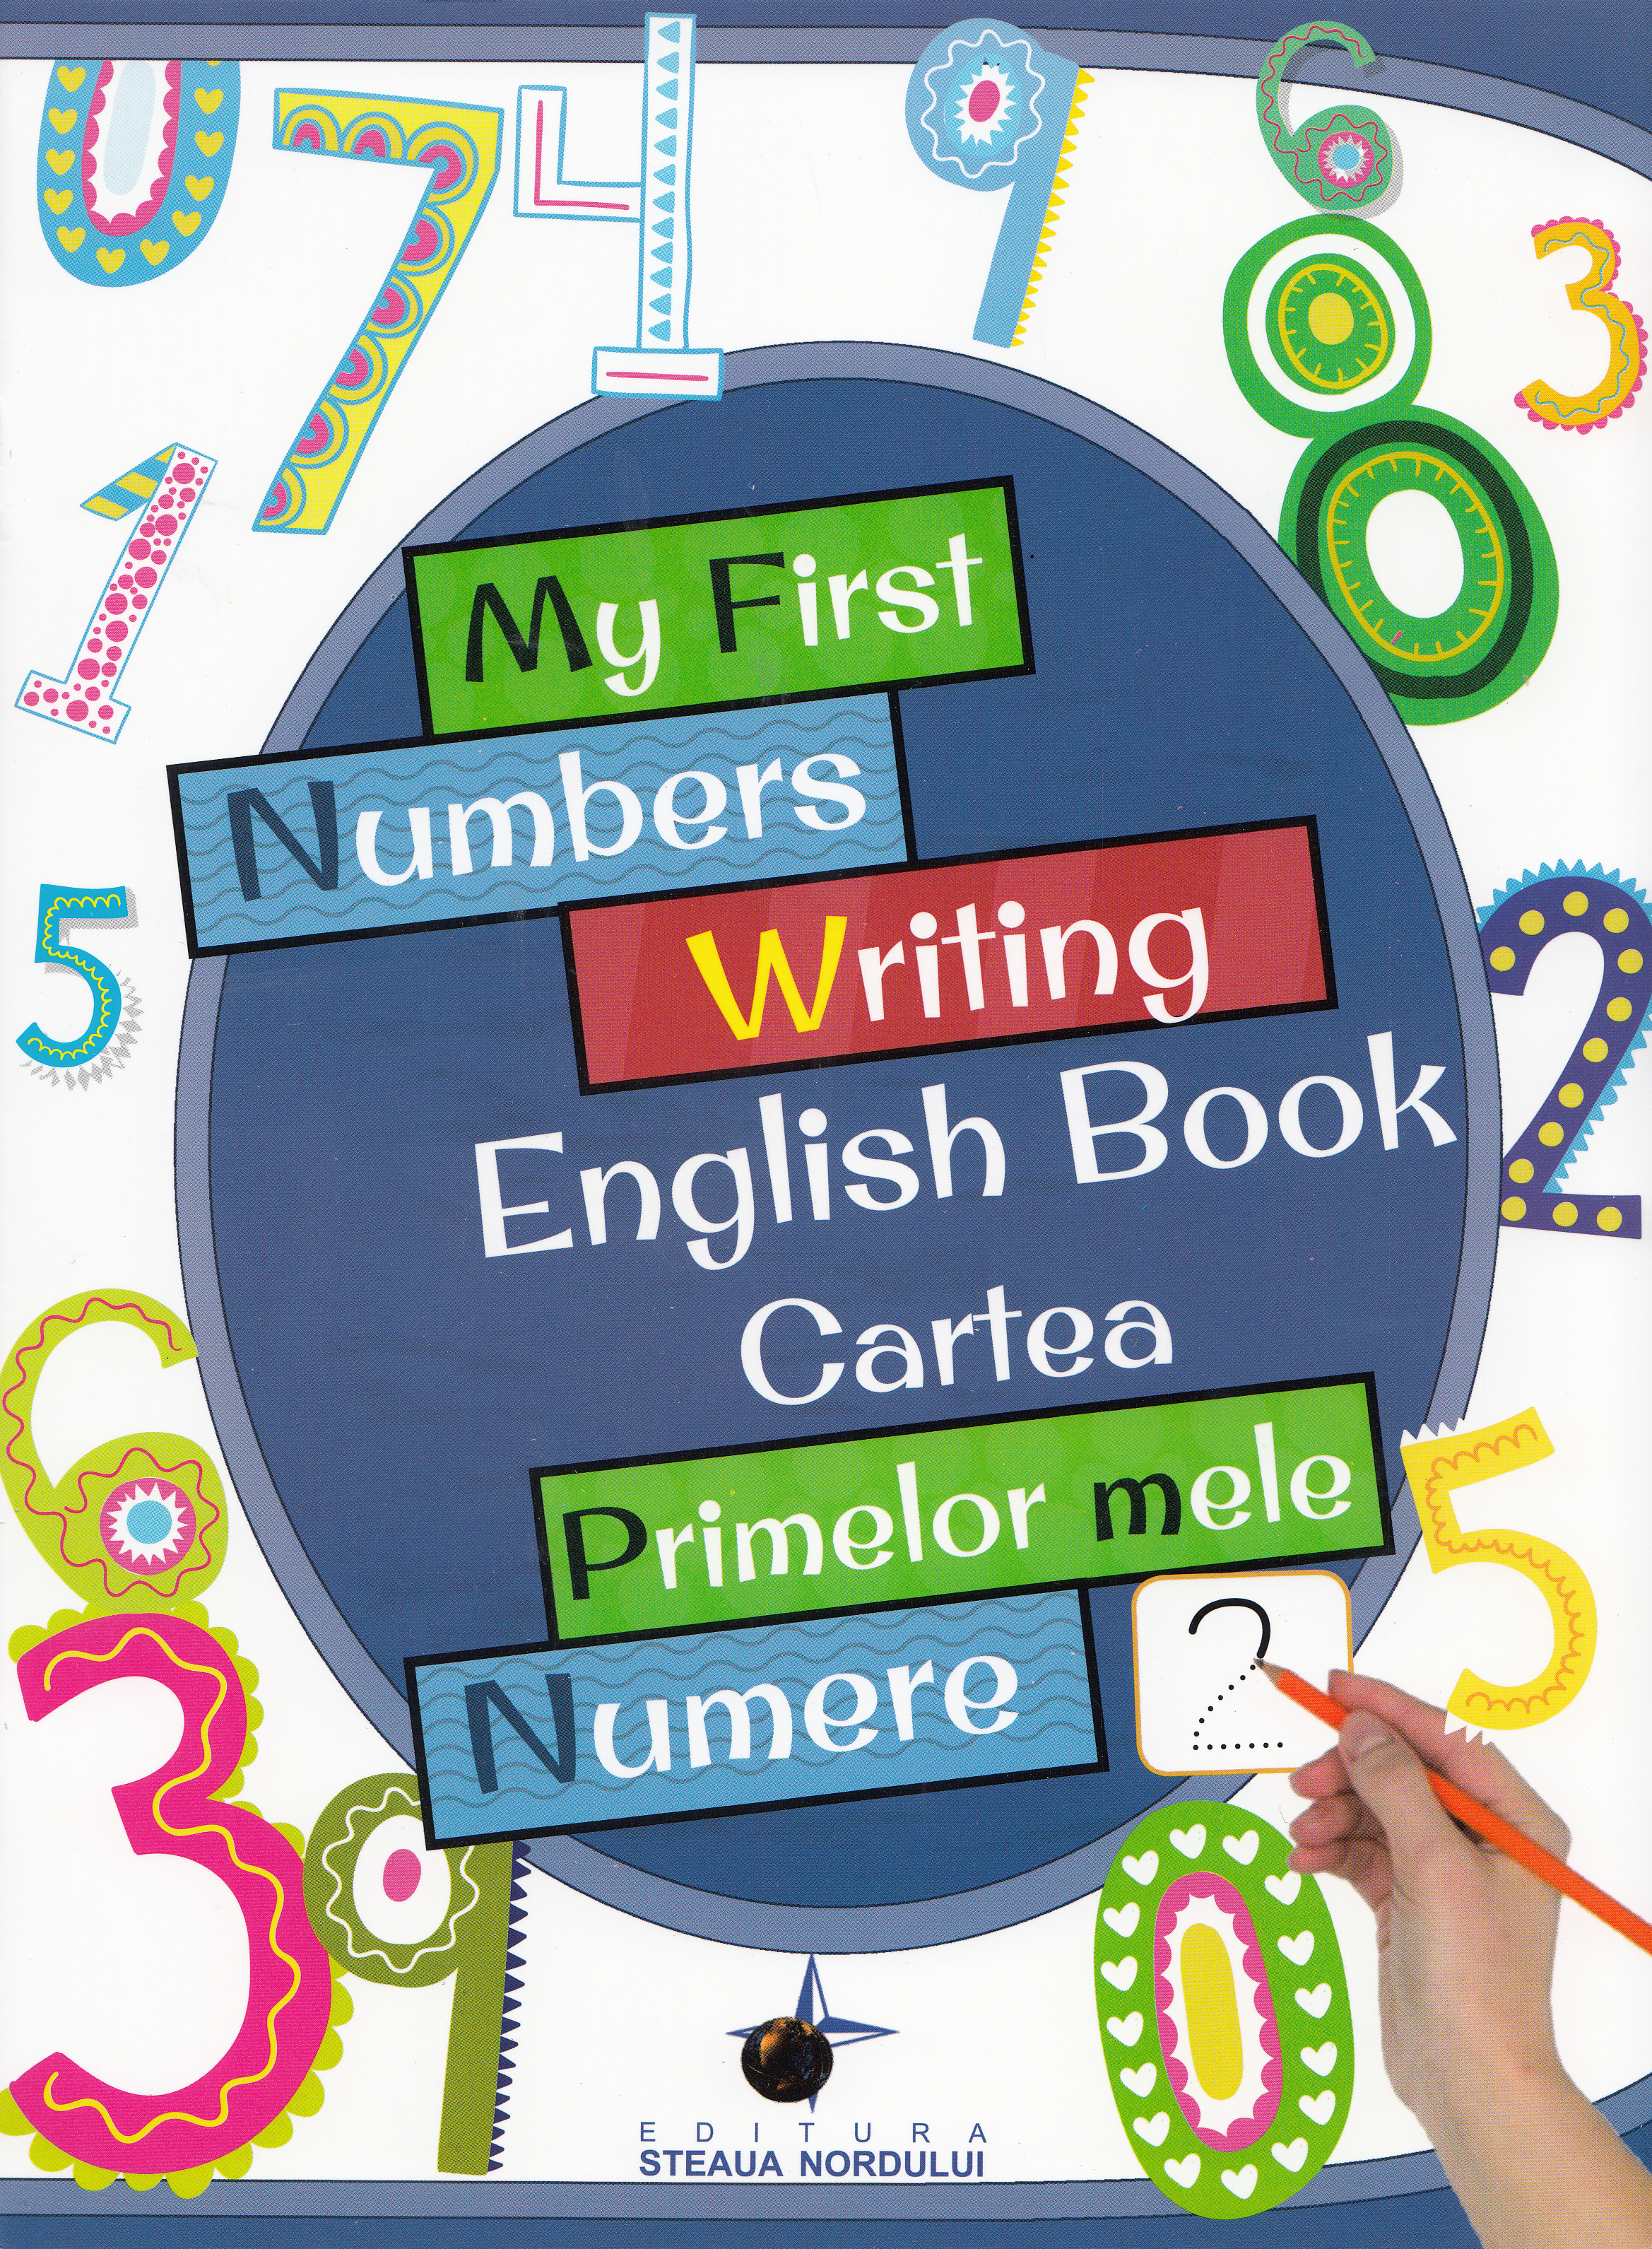 My First Numbers Writing English Book. Cartea primelor mele numere